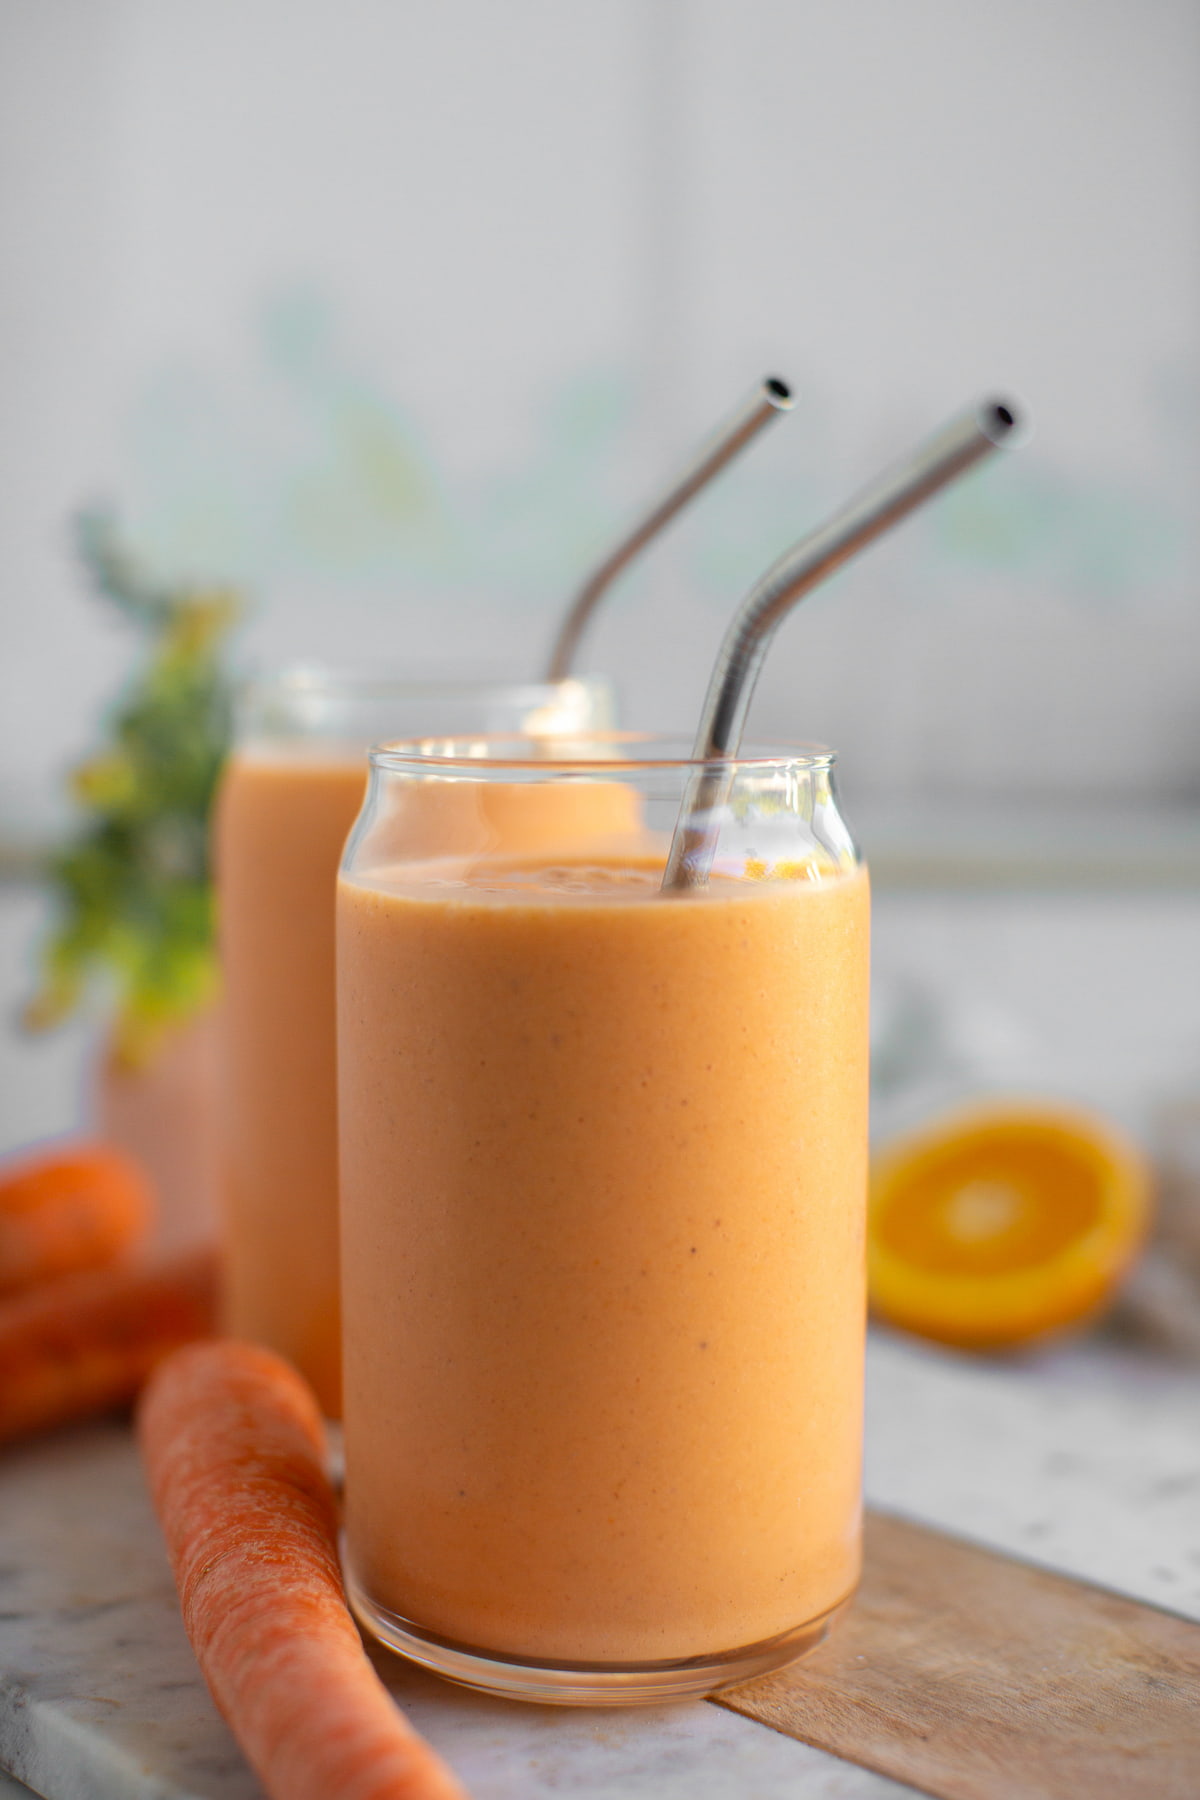 Two glasses of carrot banana smoothie next to a carrot.